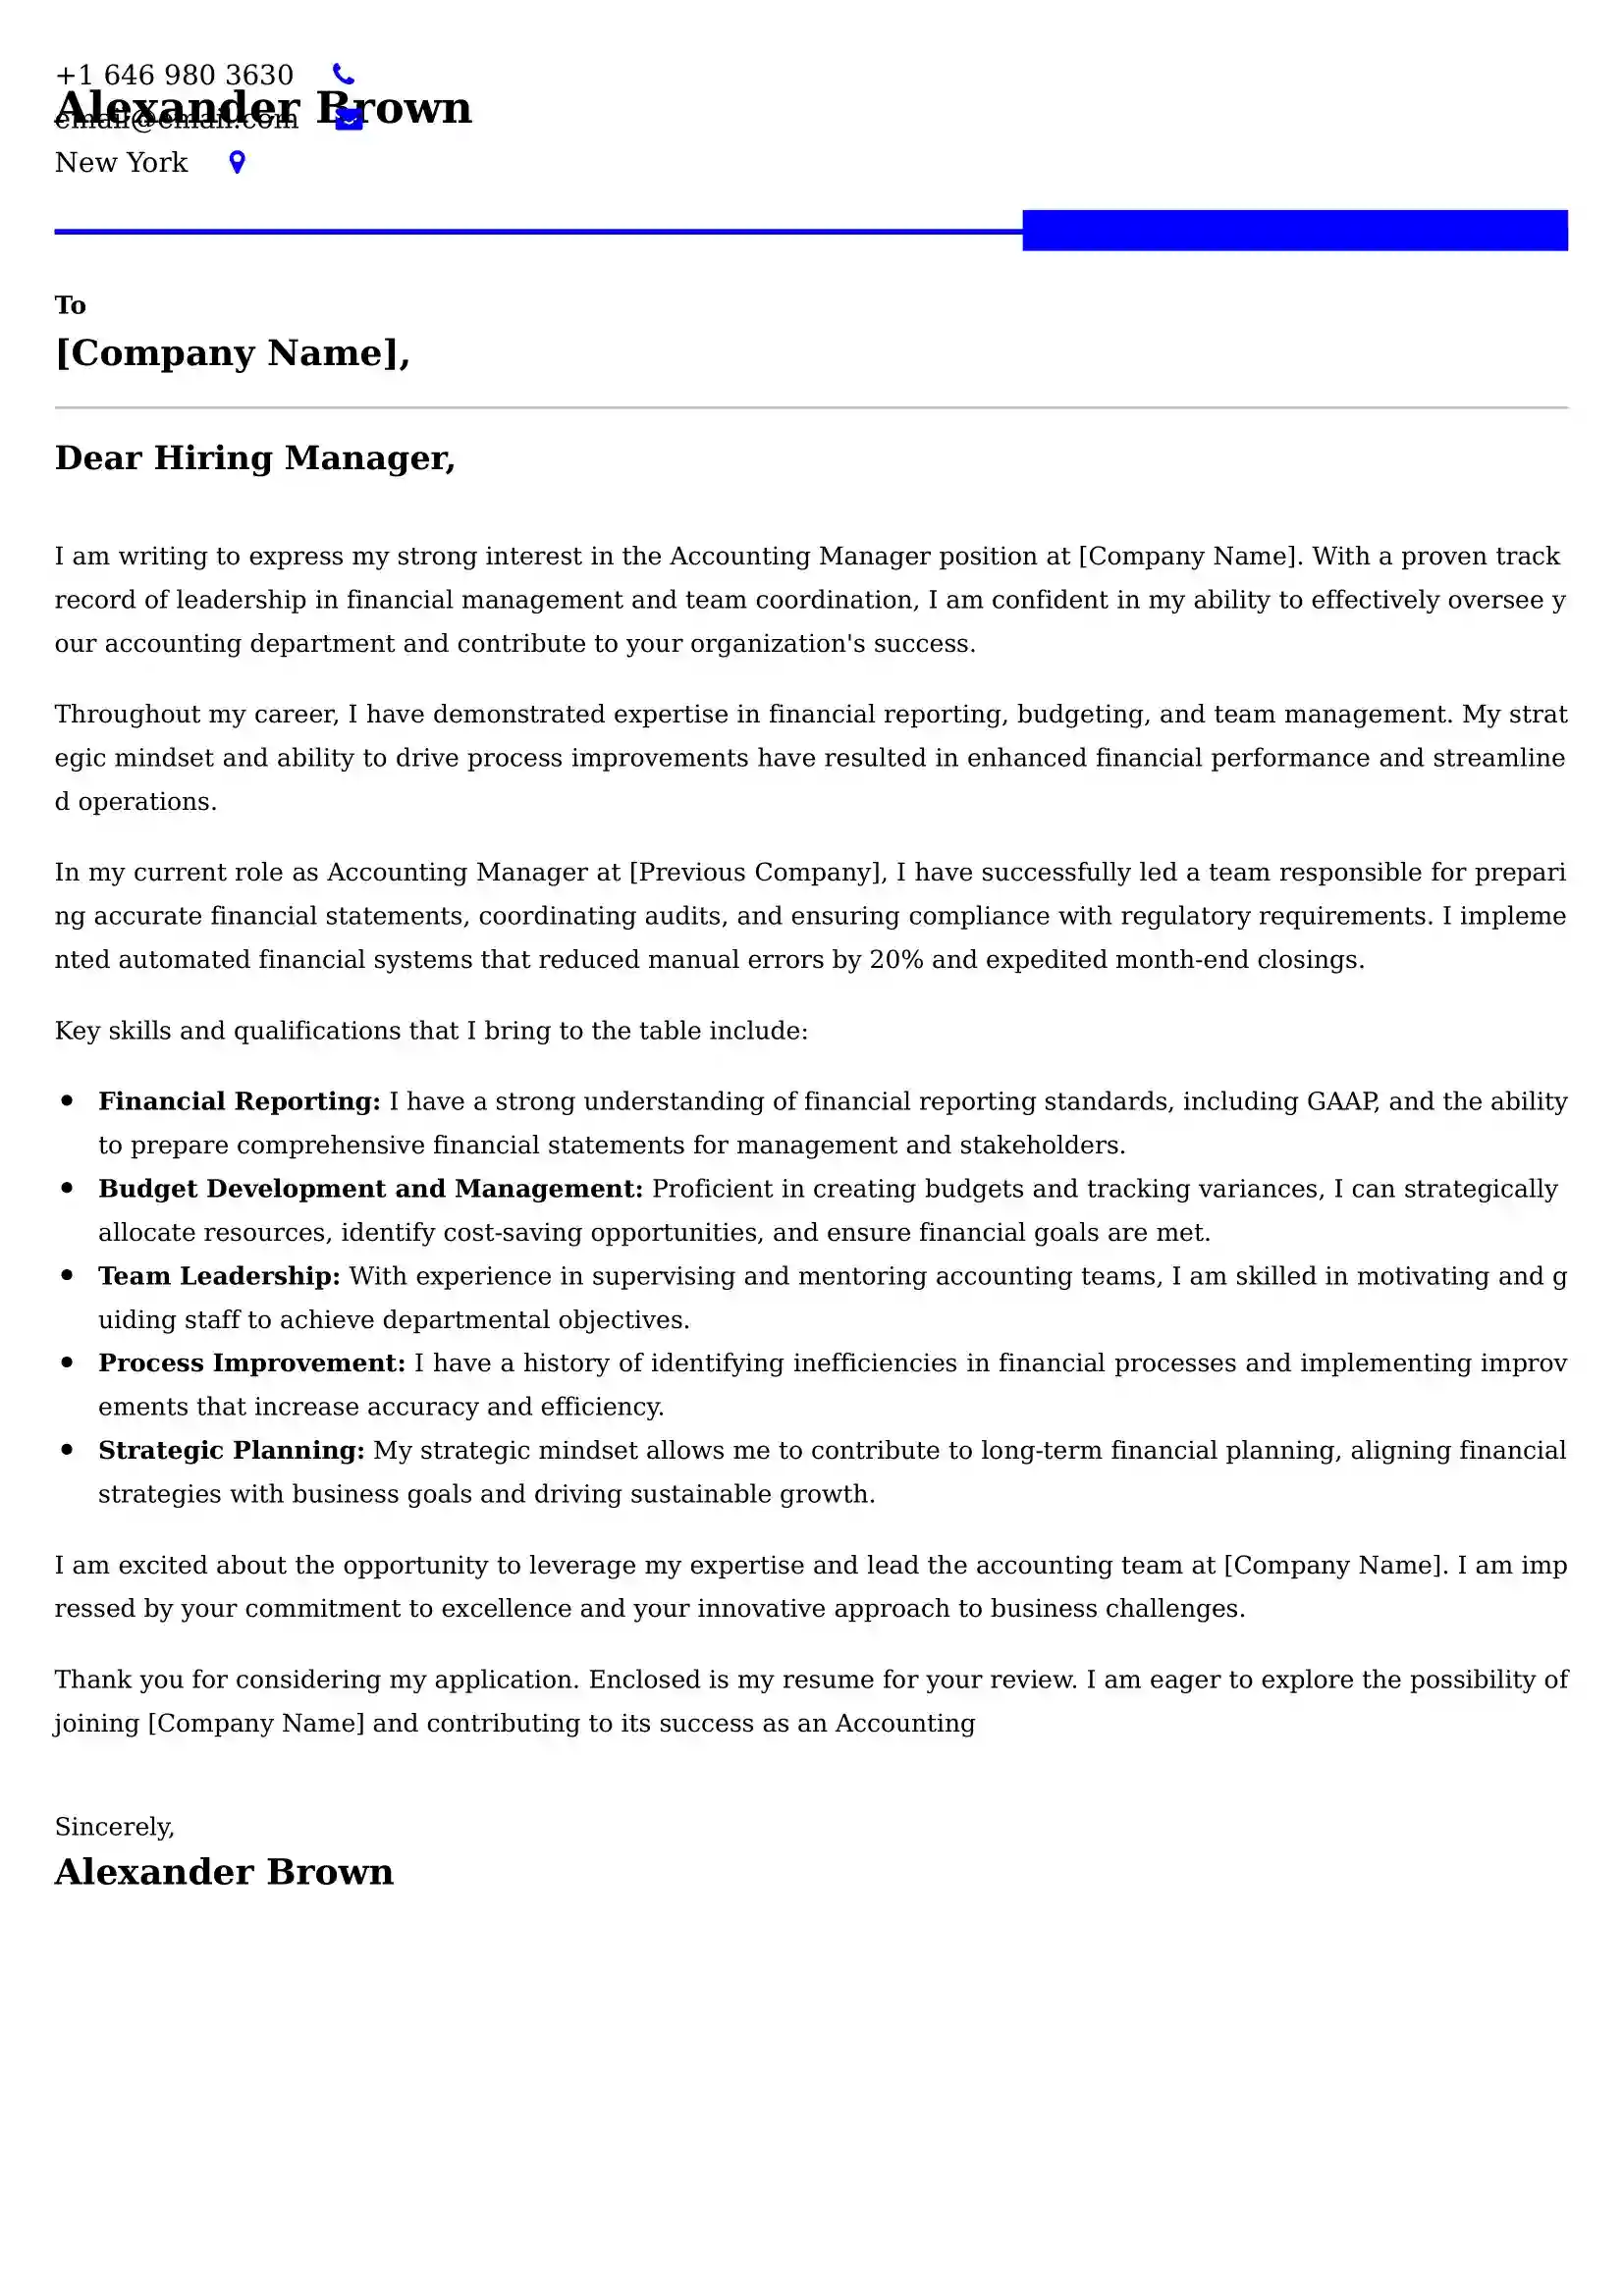 Accounting Manager Cover Letter Examples Australia